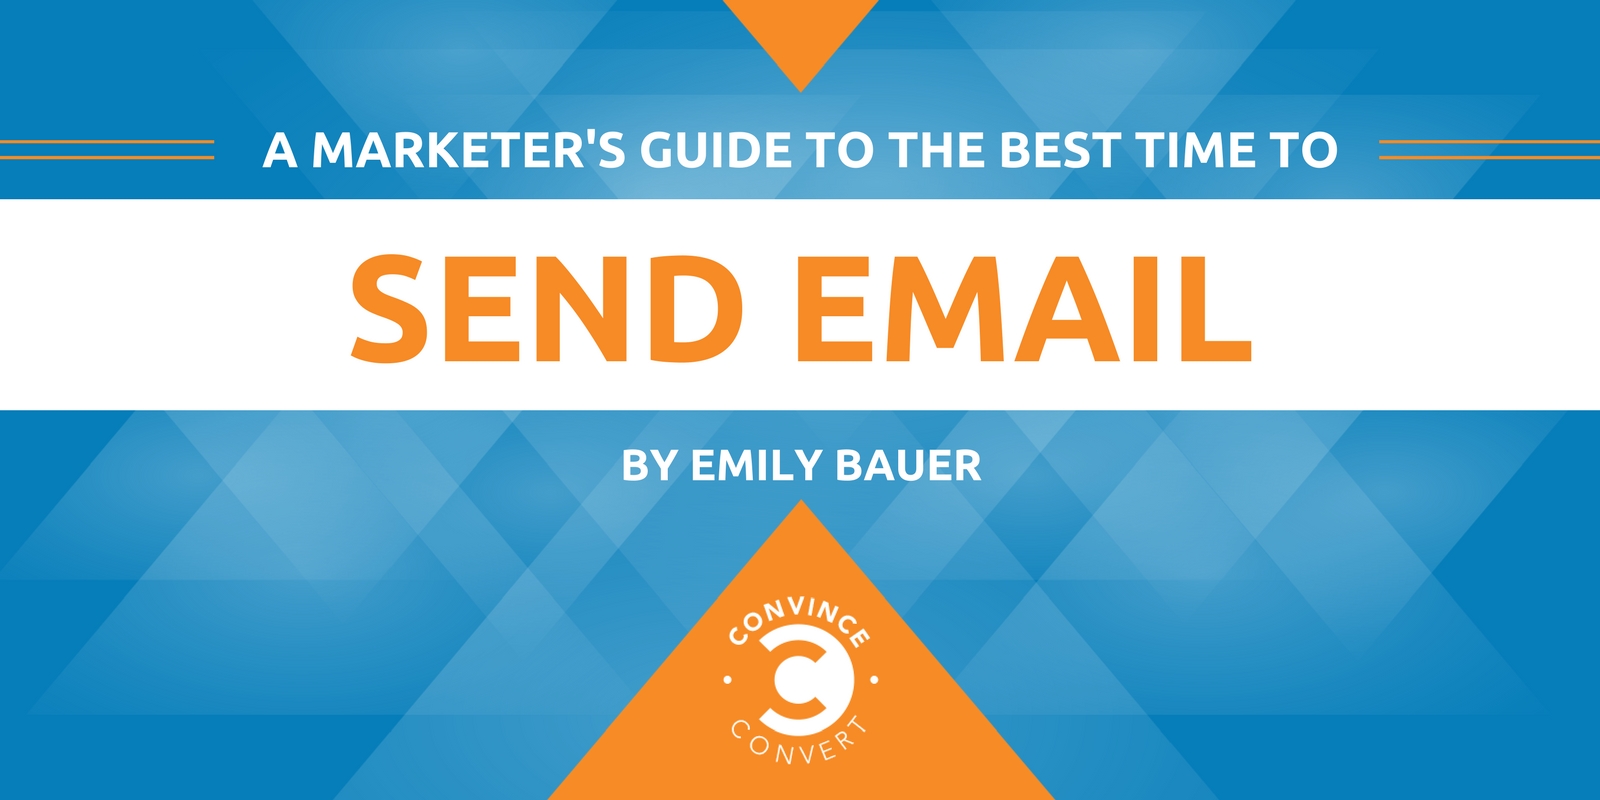 A Marketer's Guide to the Best Time to Send Email